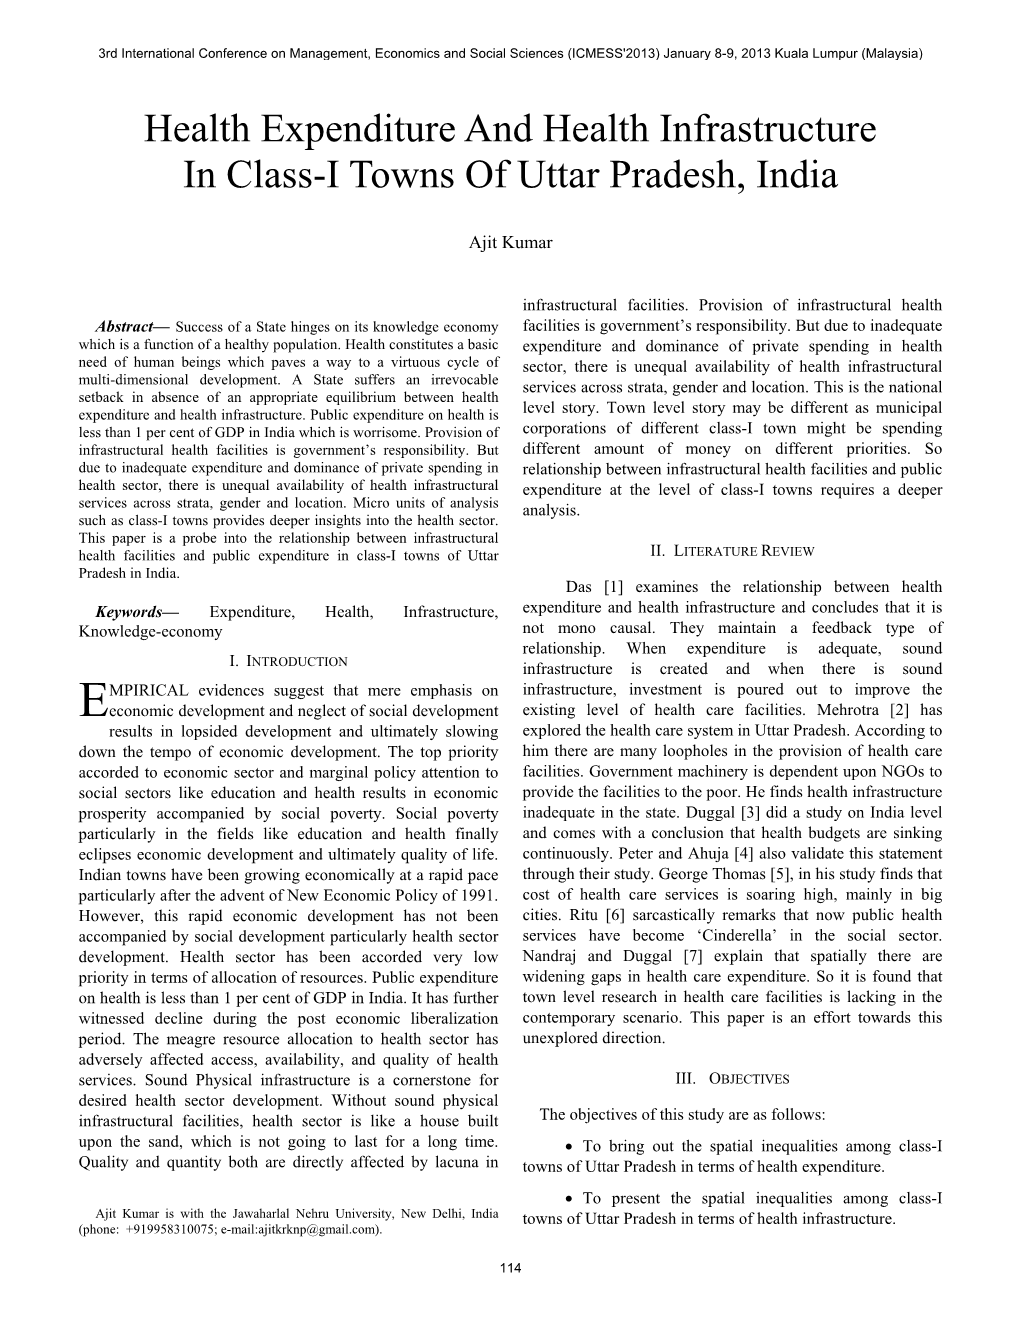 Health Expenditure and Health Infrastructure in Class-I Towns of Uttar Pradesh, India